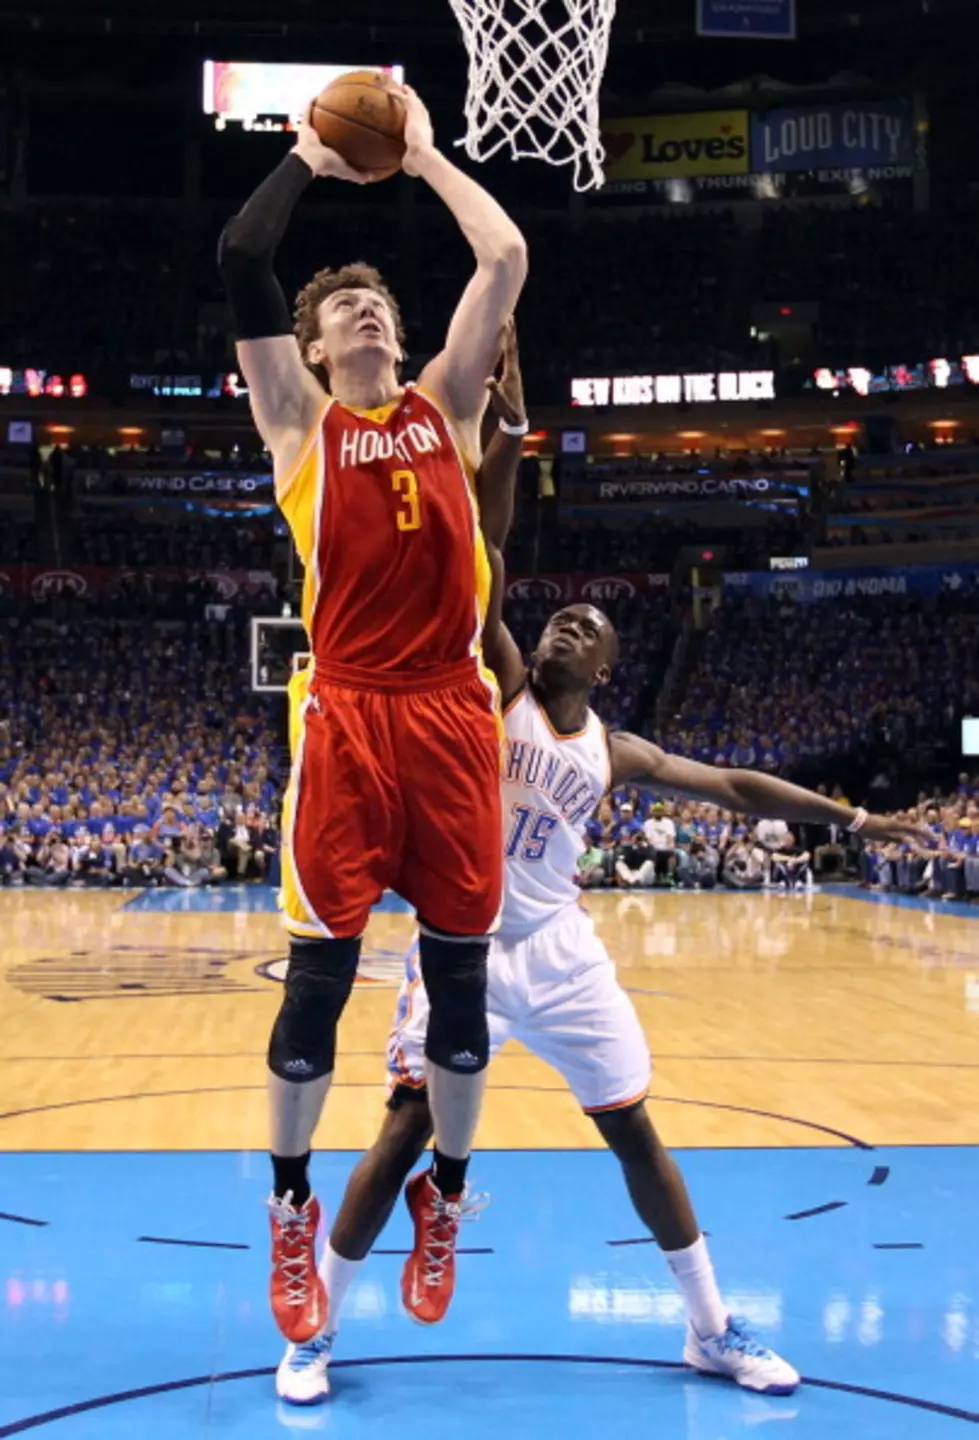 Pelicans Acquire Center Omer Asik In Trade With Rockets